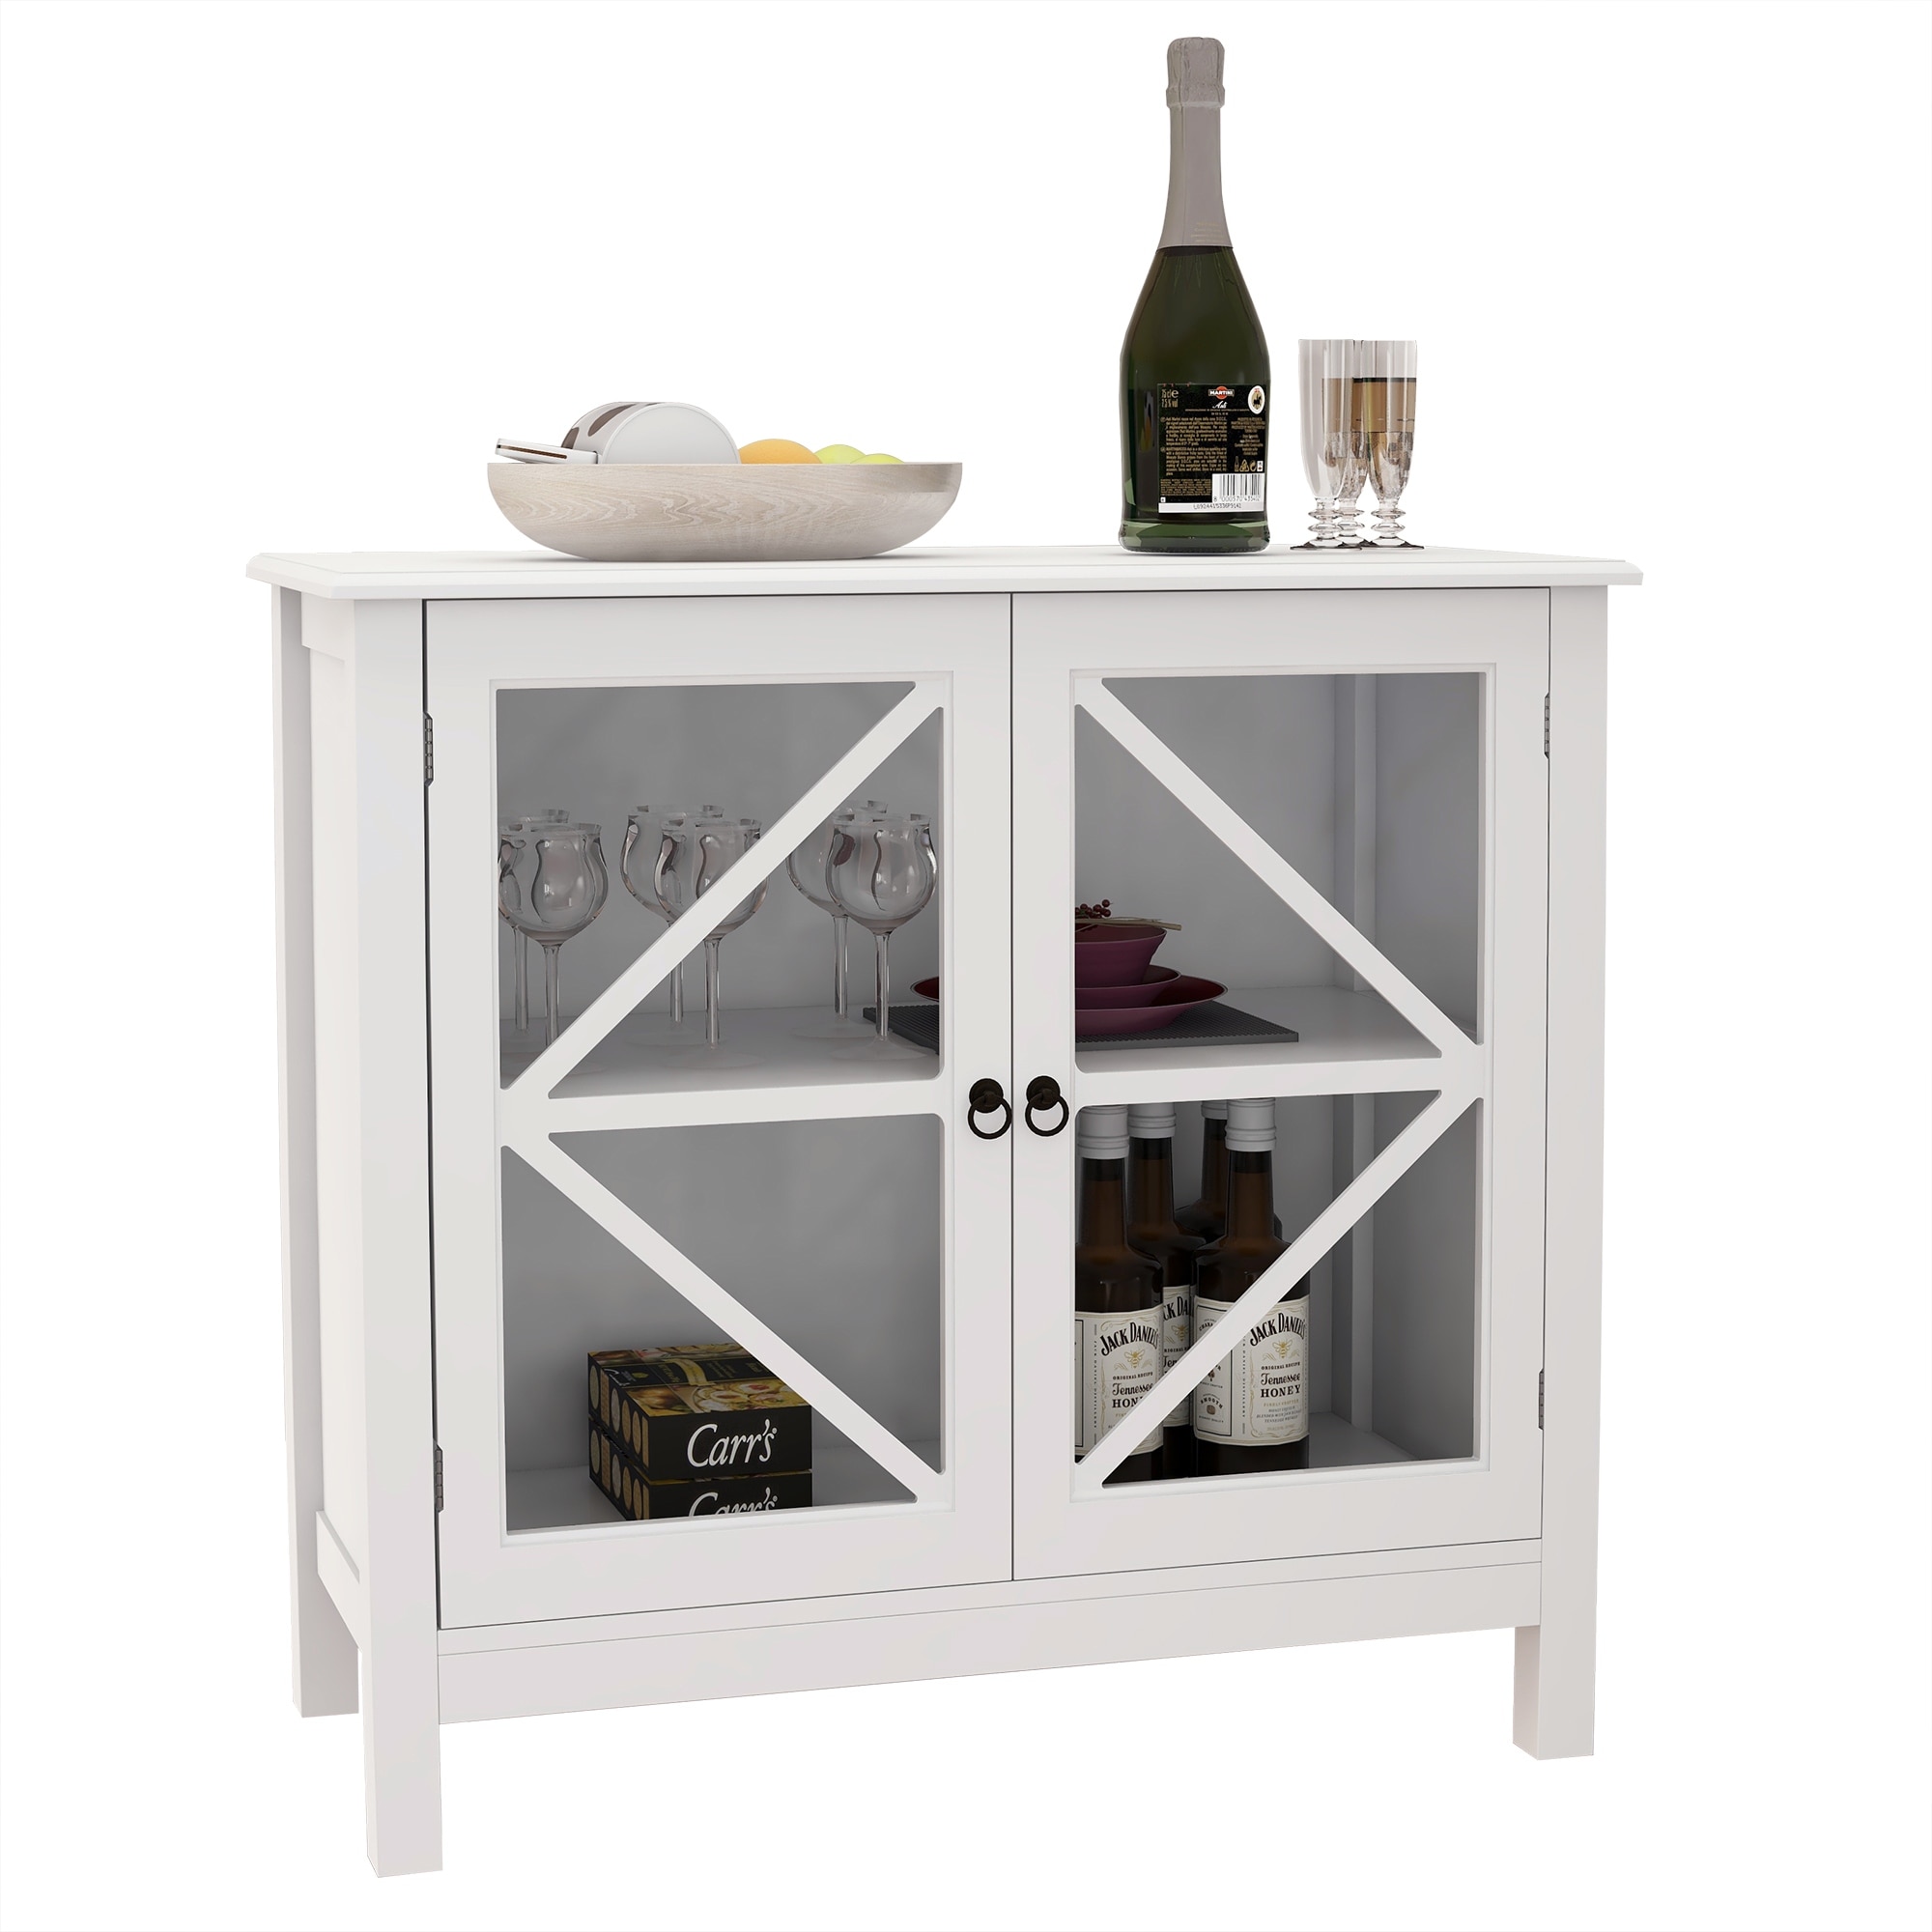 Rustic Style Kitchen Cabinet MDF Board Lockers Square Edged Table Top Sideboard with Double Glass Doors